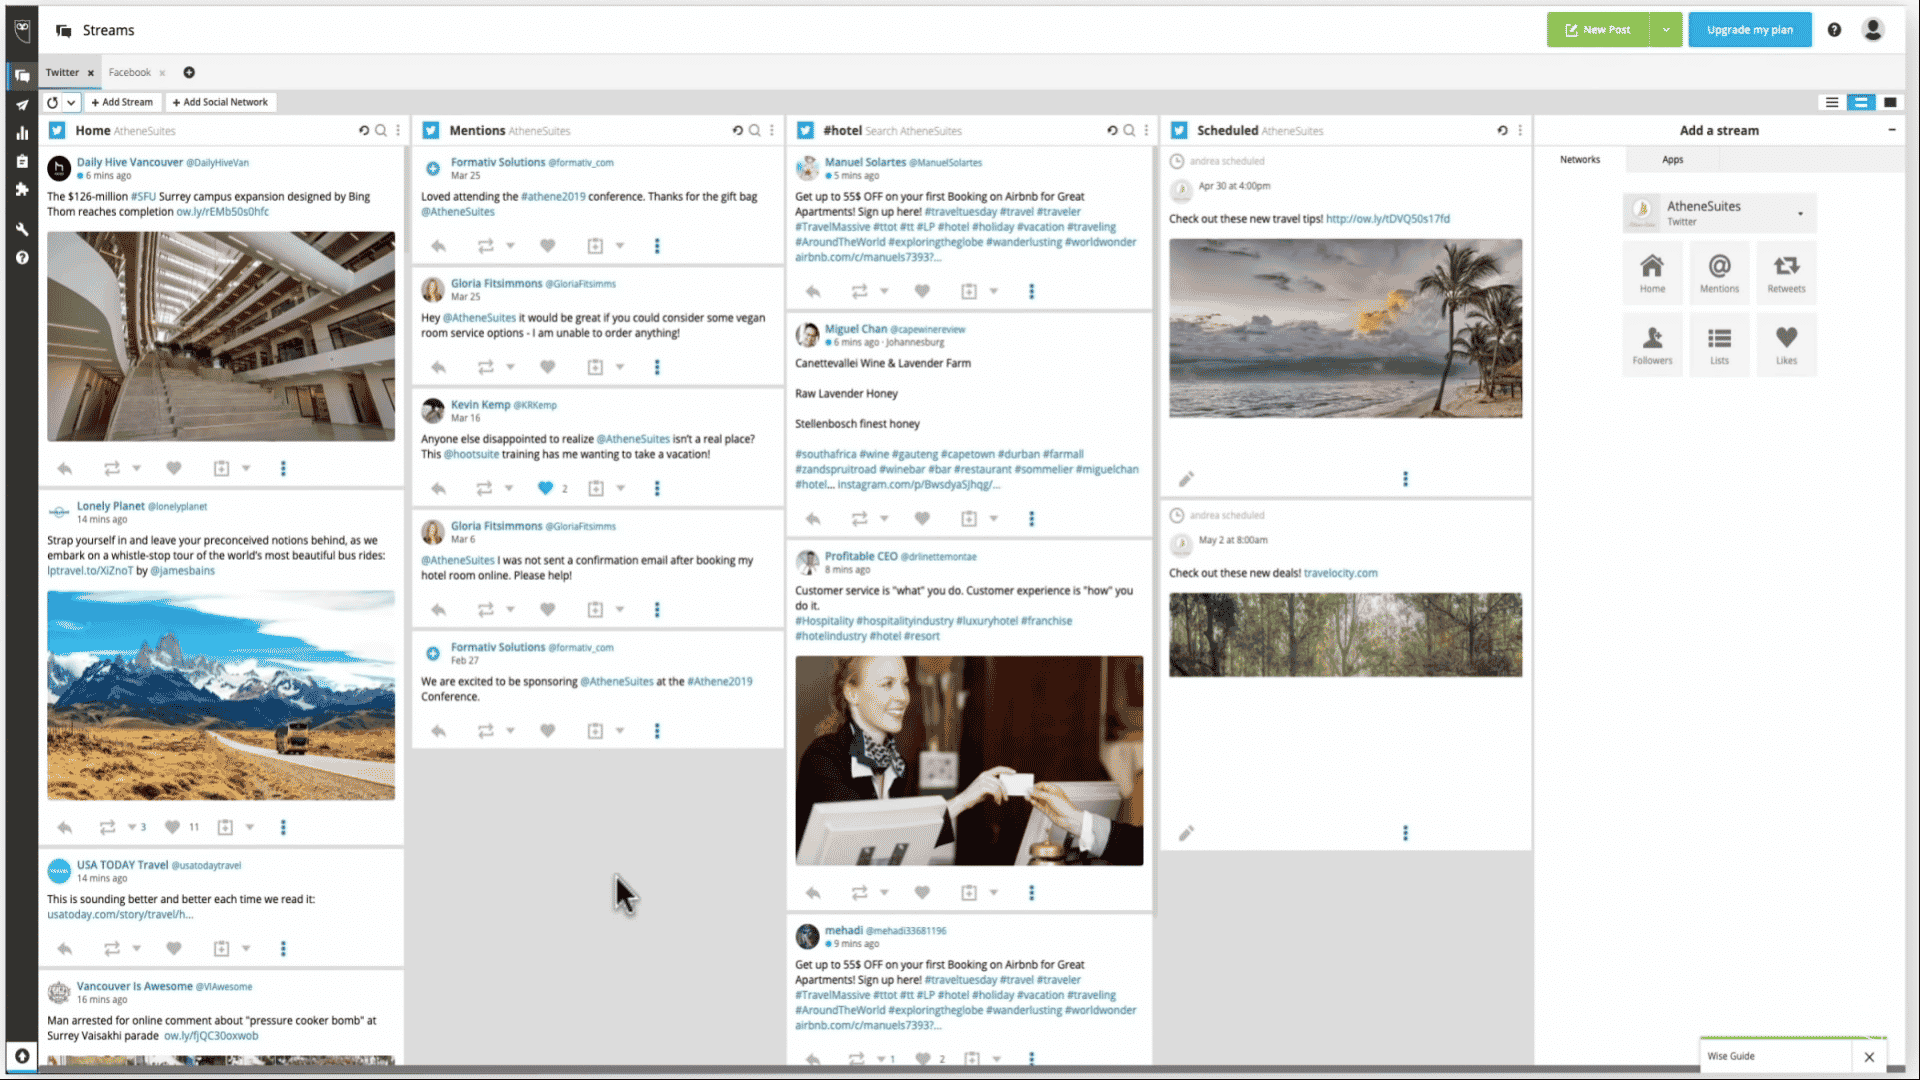 All-on-one dashboard of Hootsuite makes it a great workflow app to manage your social media channels in one place